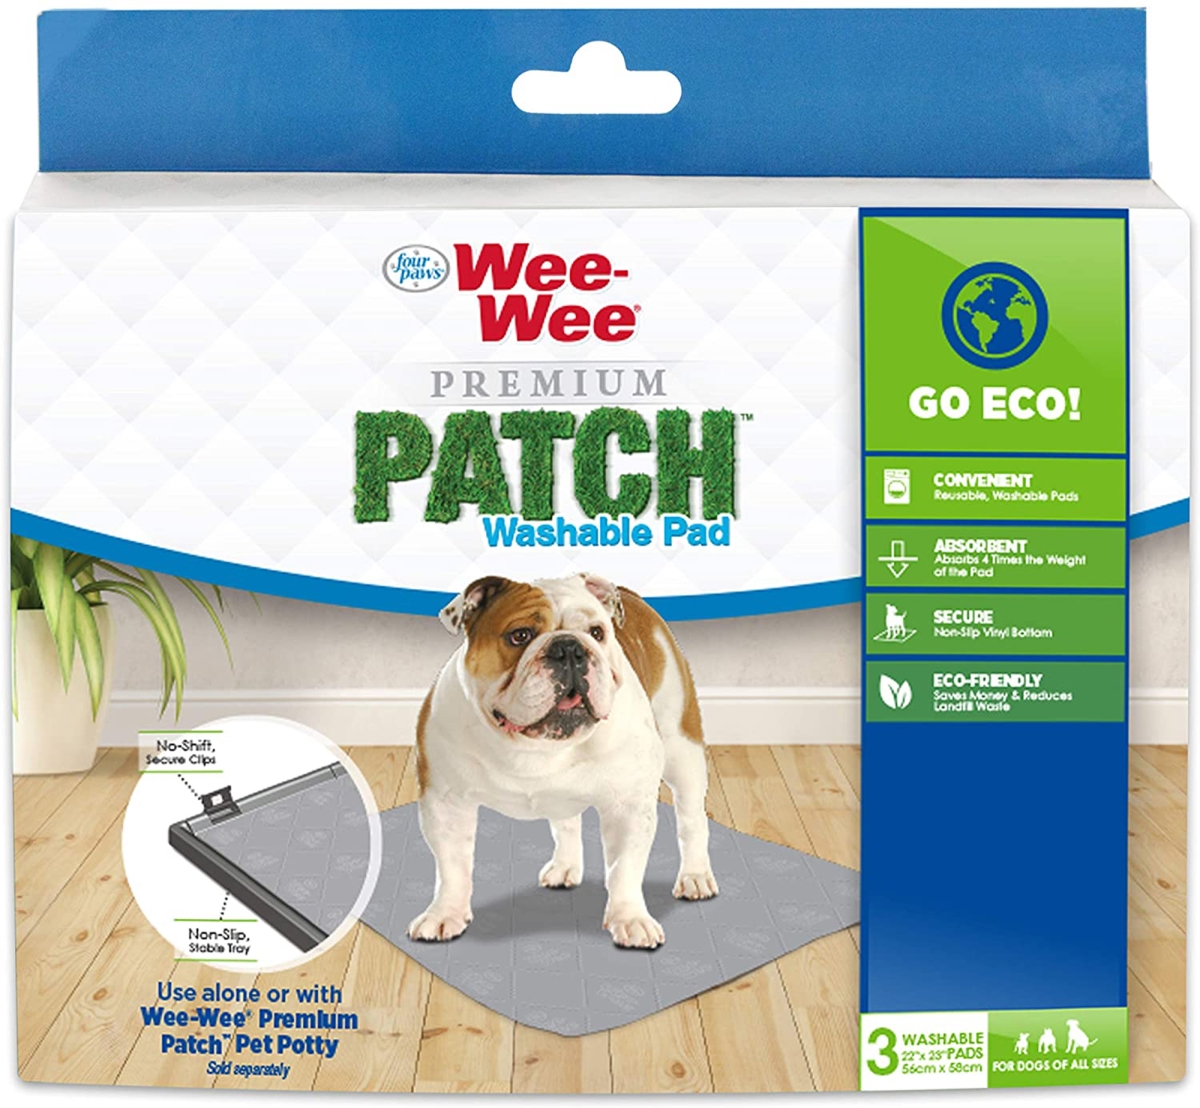 Picture of Four Paws Products 045663974831 22 x 23 in. Standard Wee-Wee Premium Patch Reusable Pee Pad for Dogs, 3 Count